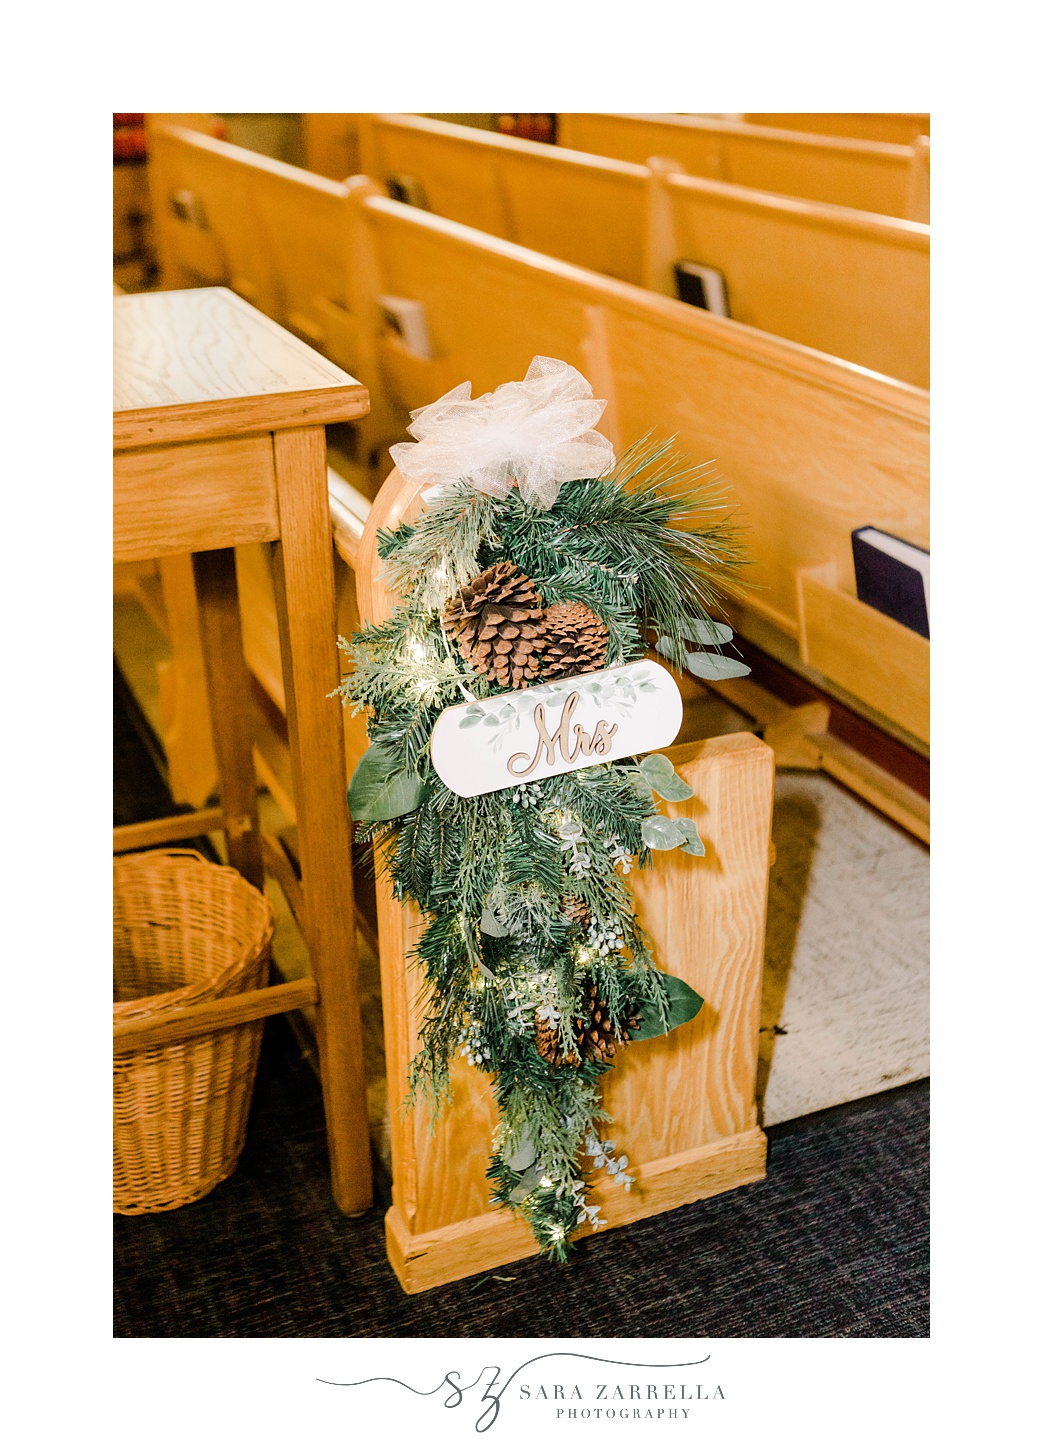 Mrs sign hangs with greenery and pine cone in traditional Catholic church in Rhode Island